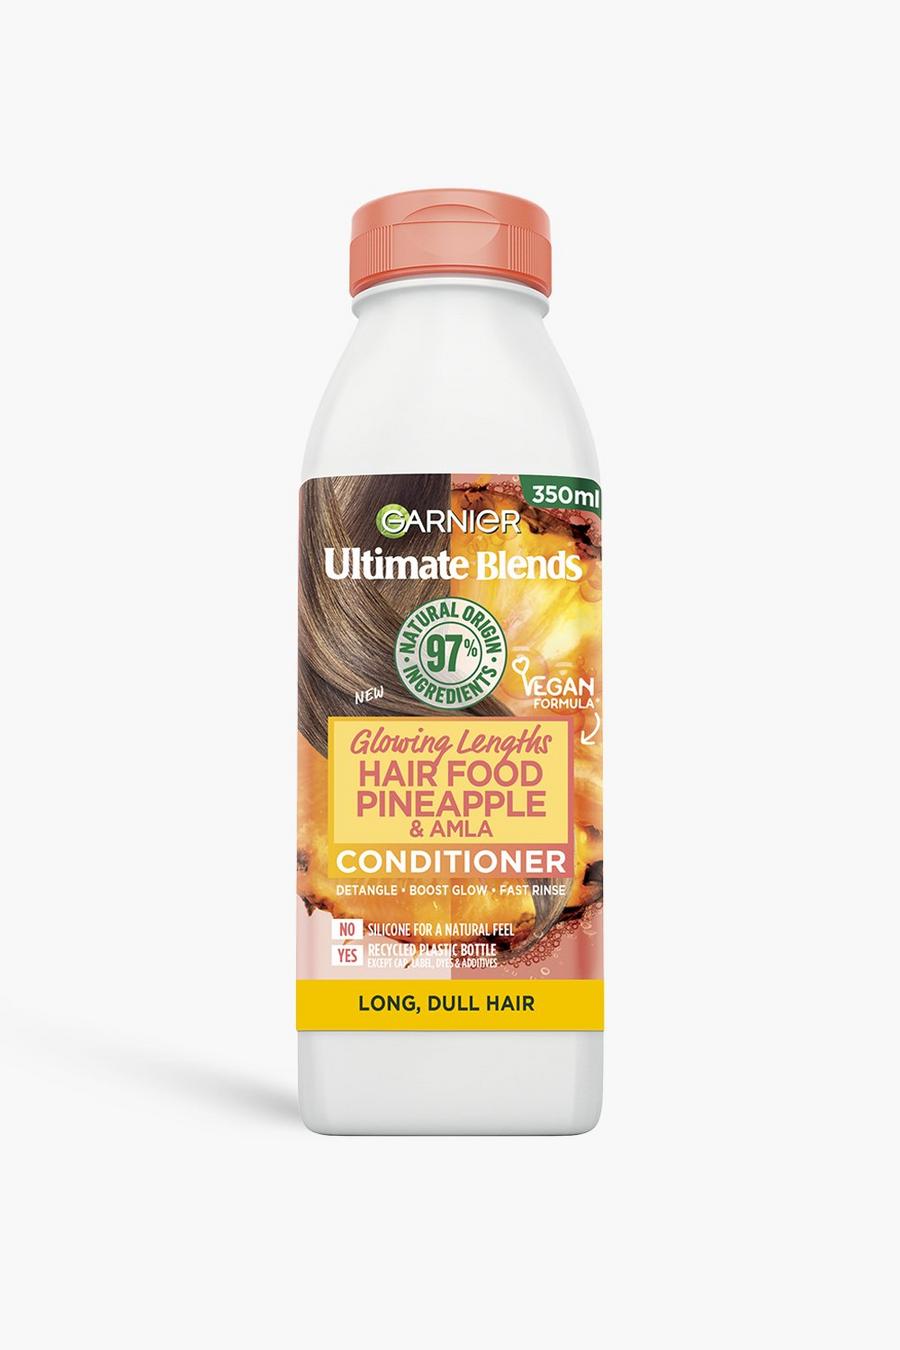 Multi Garnier Ultimate Blends Glowing Lengths Pineapple & Amla Hair Food Conditioner for Long Dull Hair 350ml image number 1